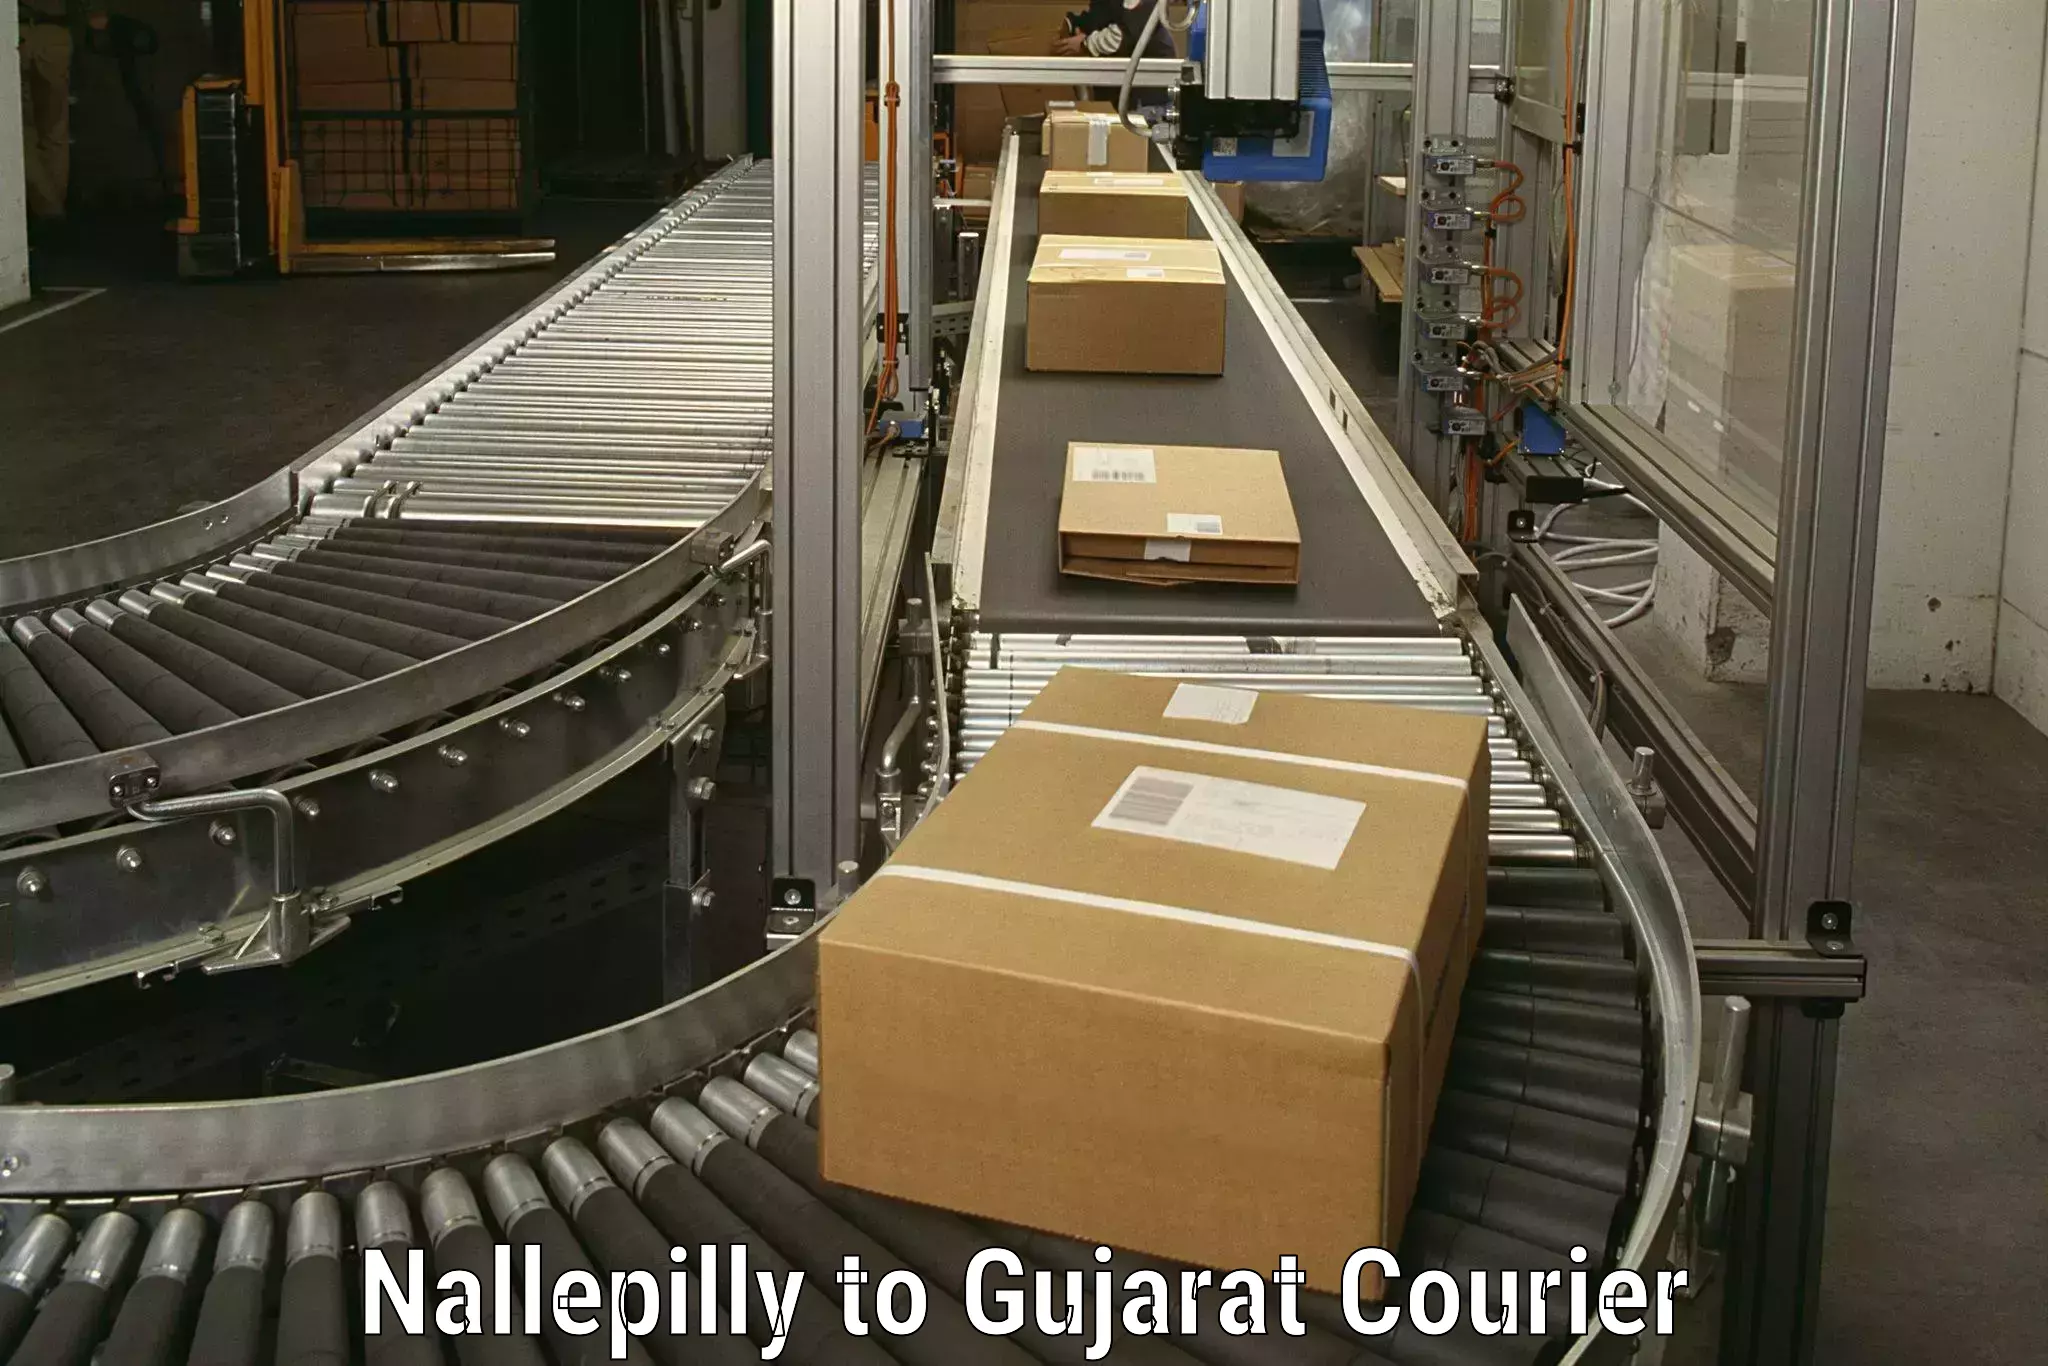 Furniture transport professionals Nallepilly to Ahmedabad